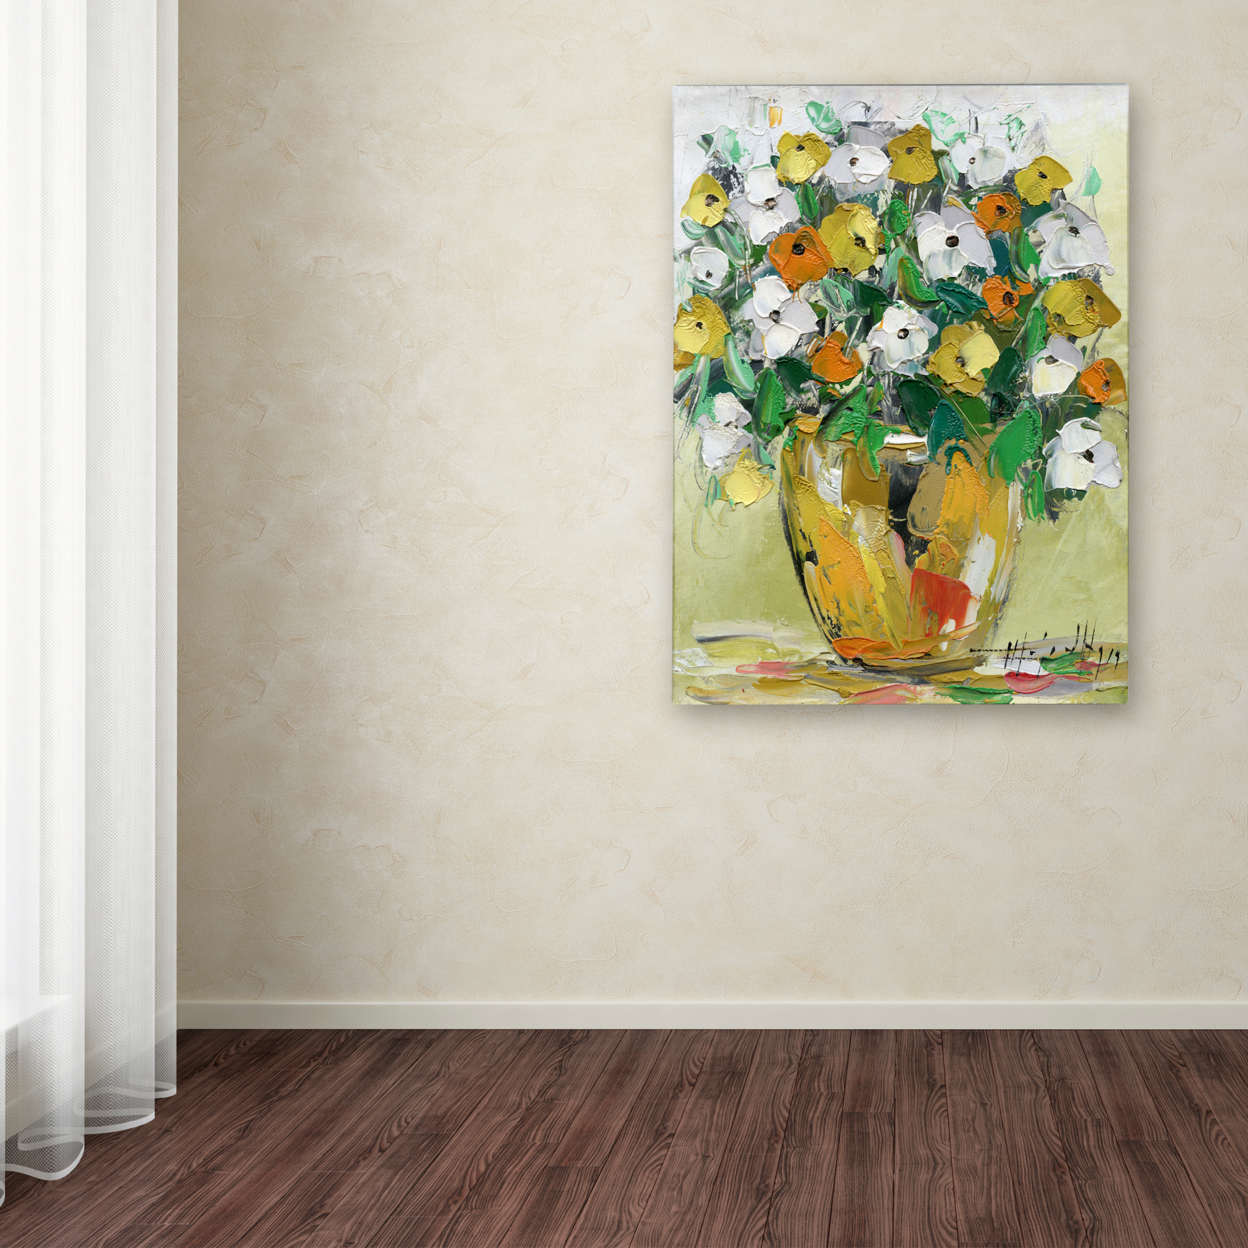 Hai Odelia 'Spring Flowers In A Vase 4' Canvas Wall Art 35 X 47 Inches